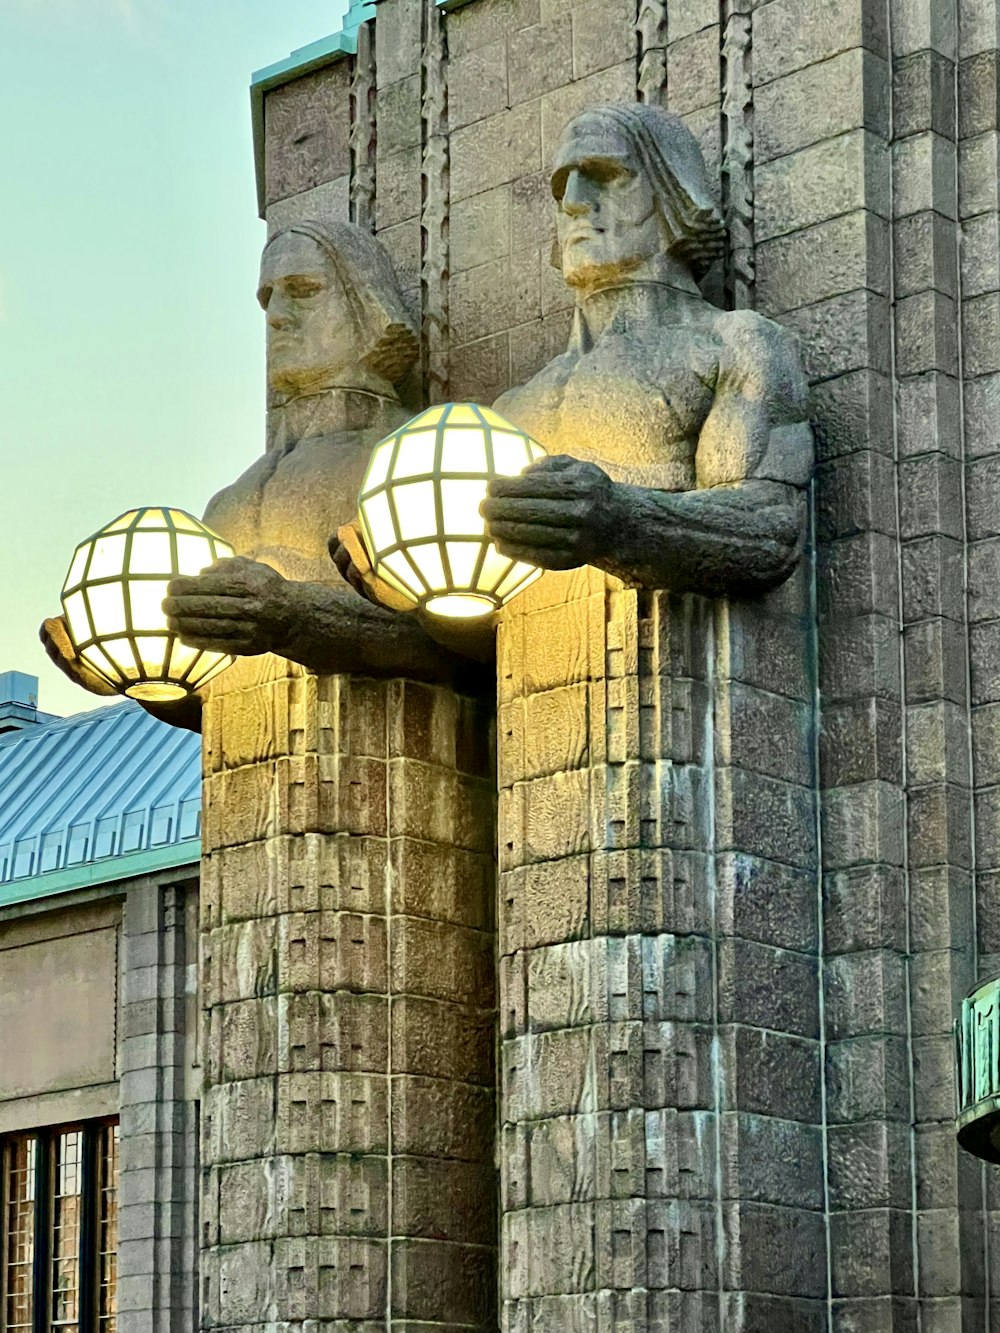 a statue of a person holding a light bulb